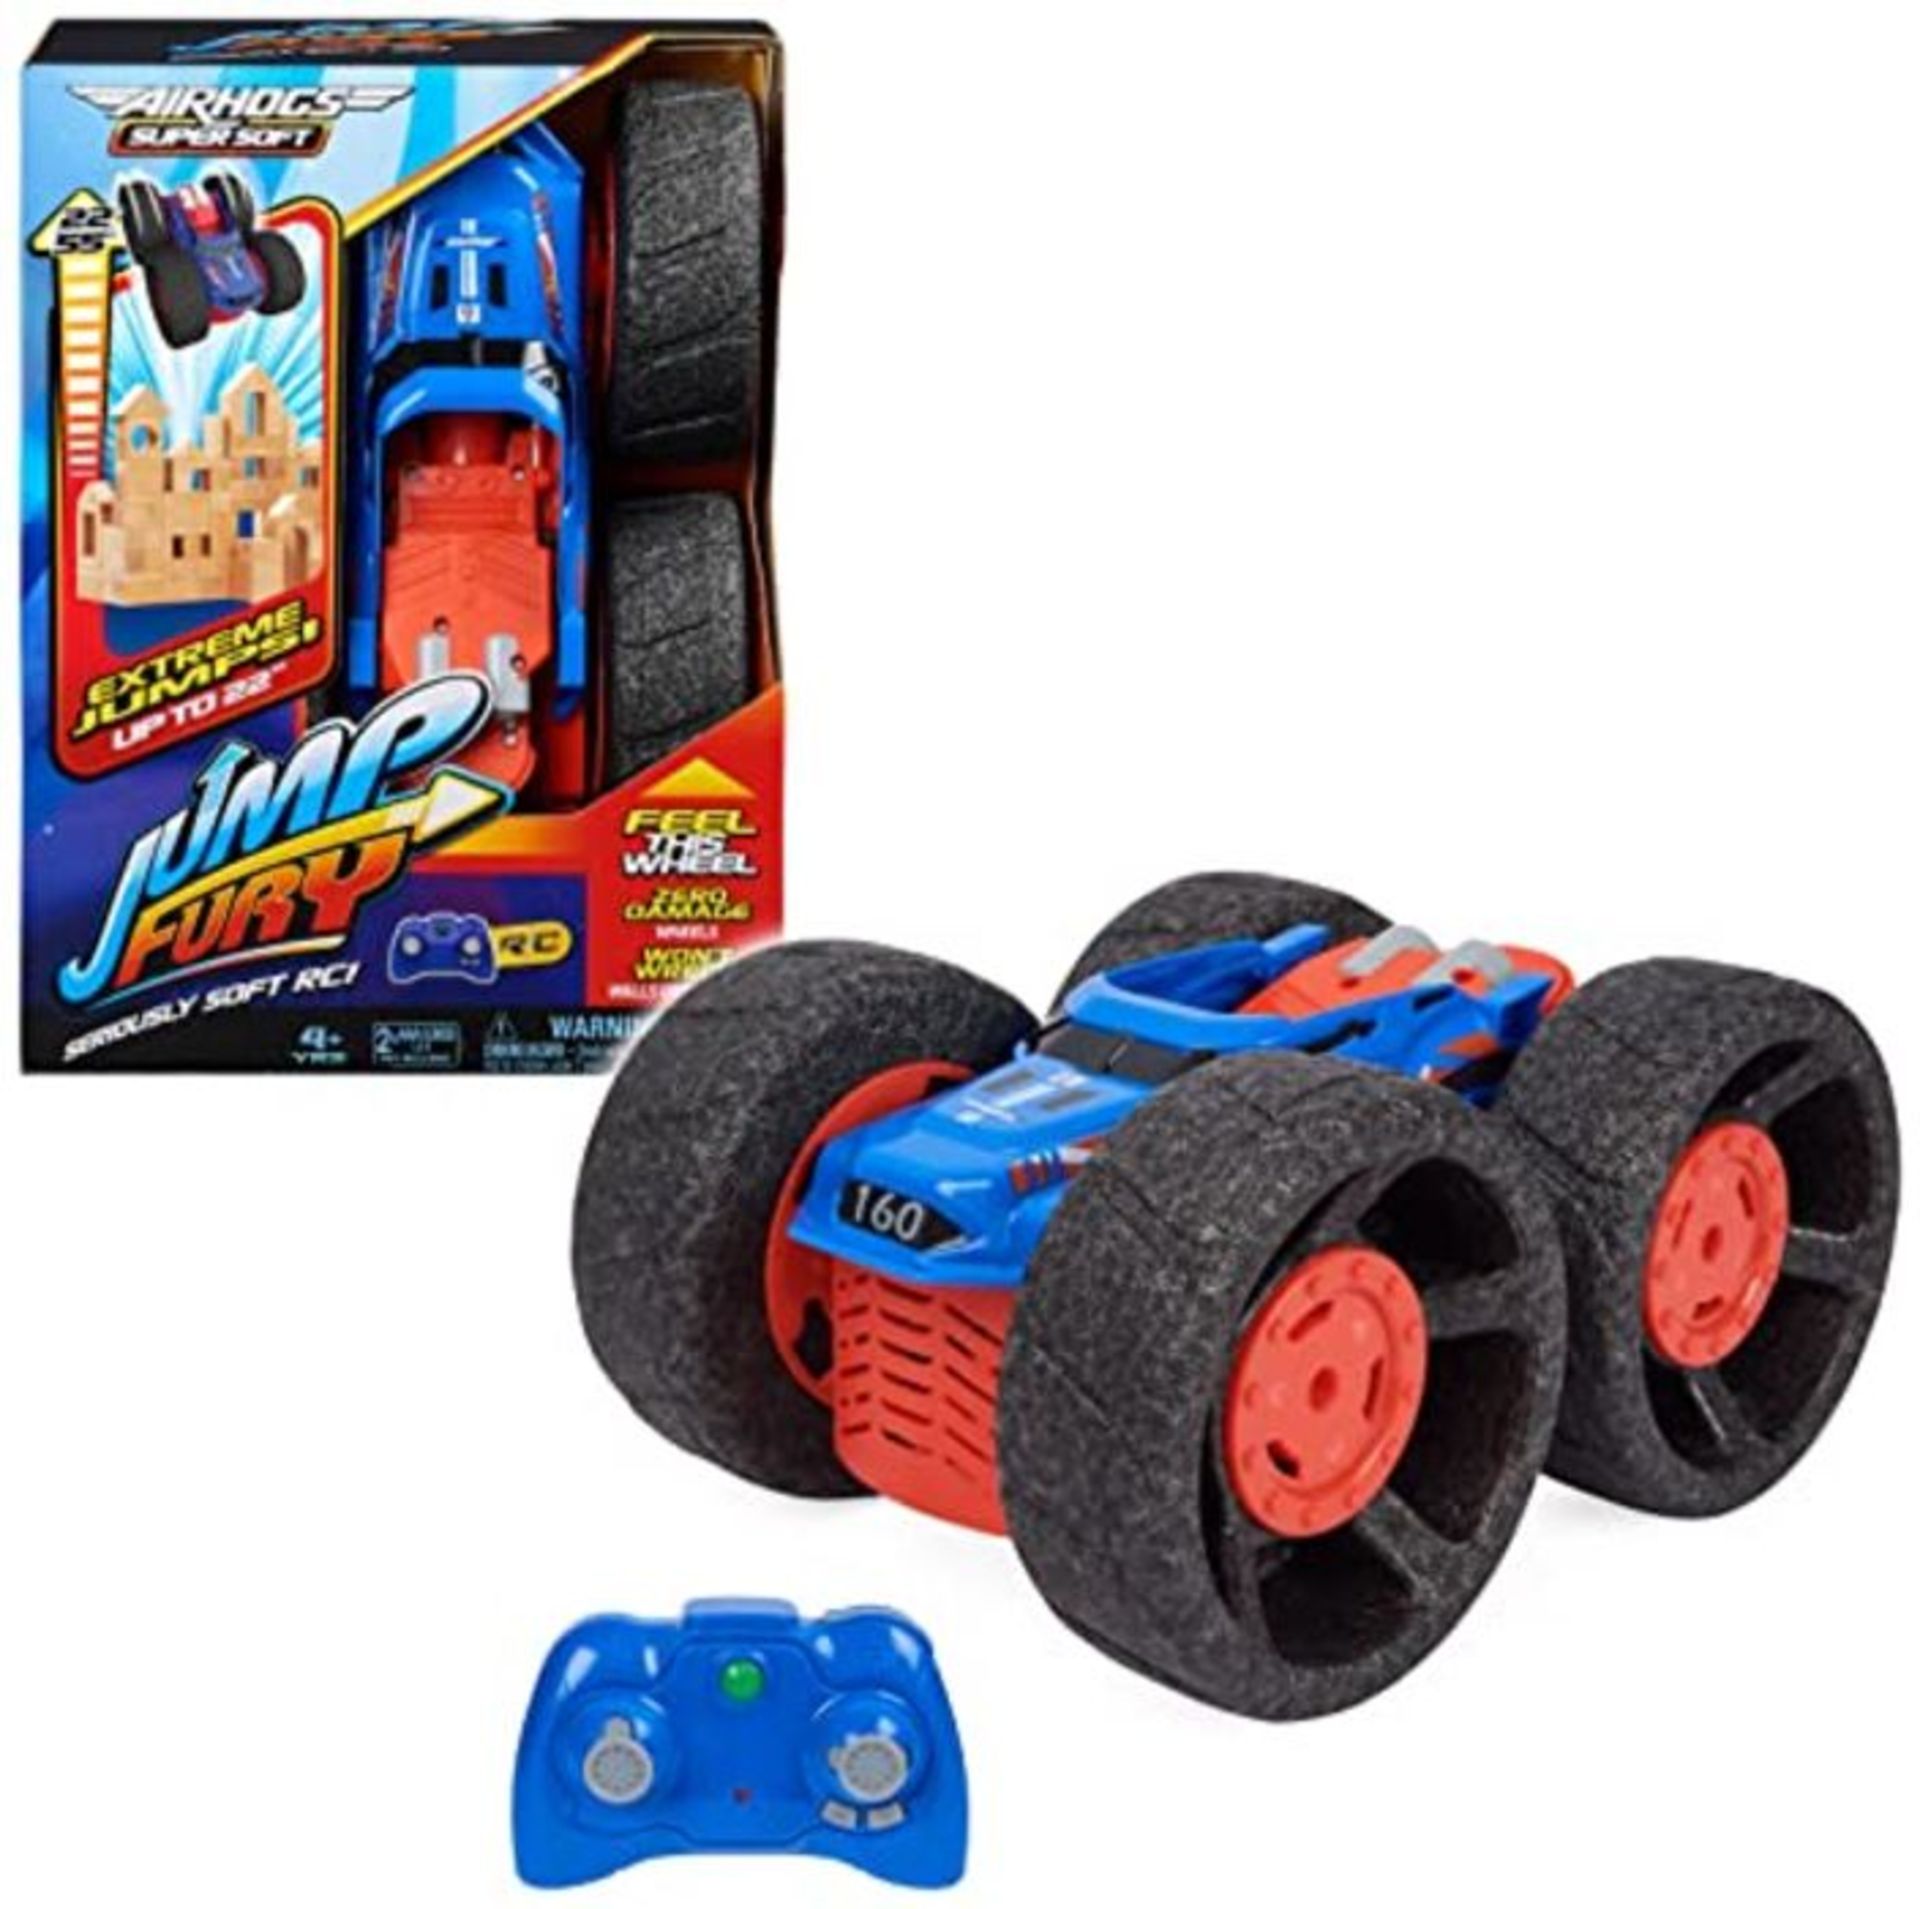 Air Hogs Super Soft, Jump Fury with Zero-Damage Wheels, Extreme Jumping Remote Control